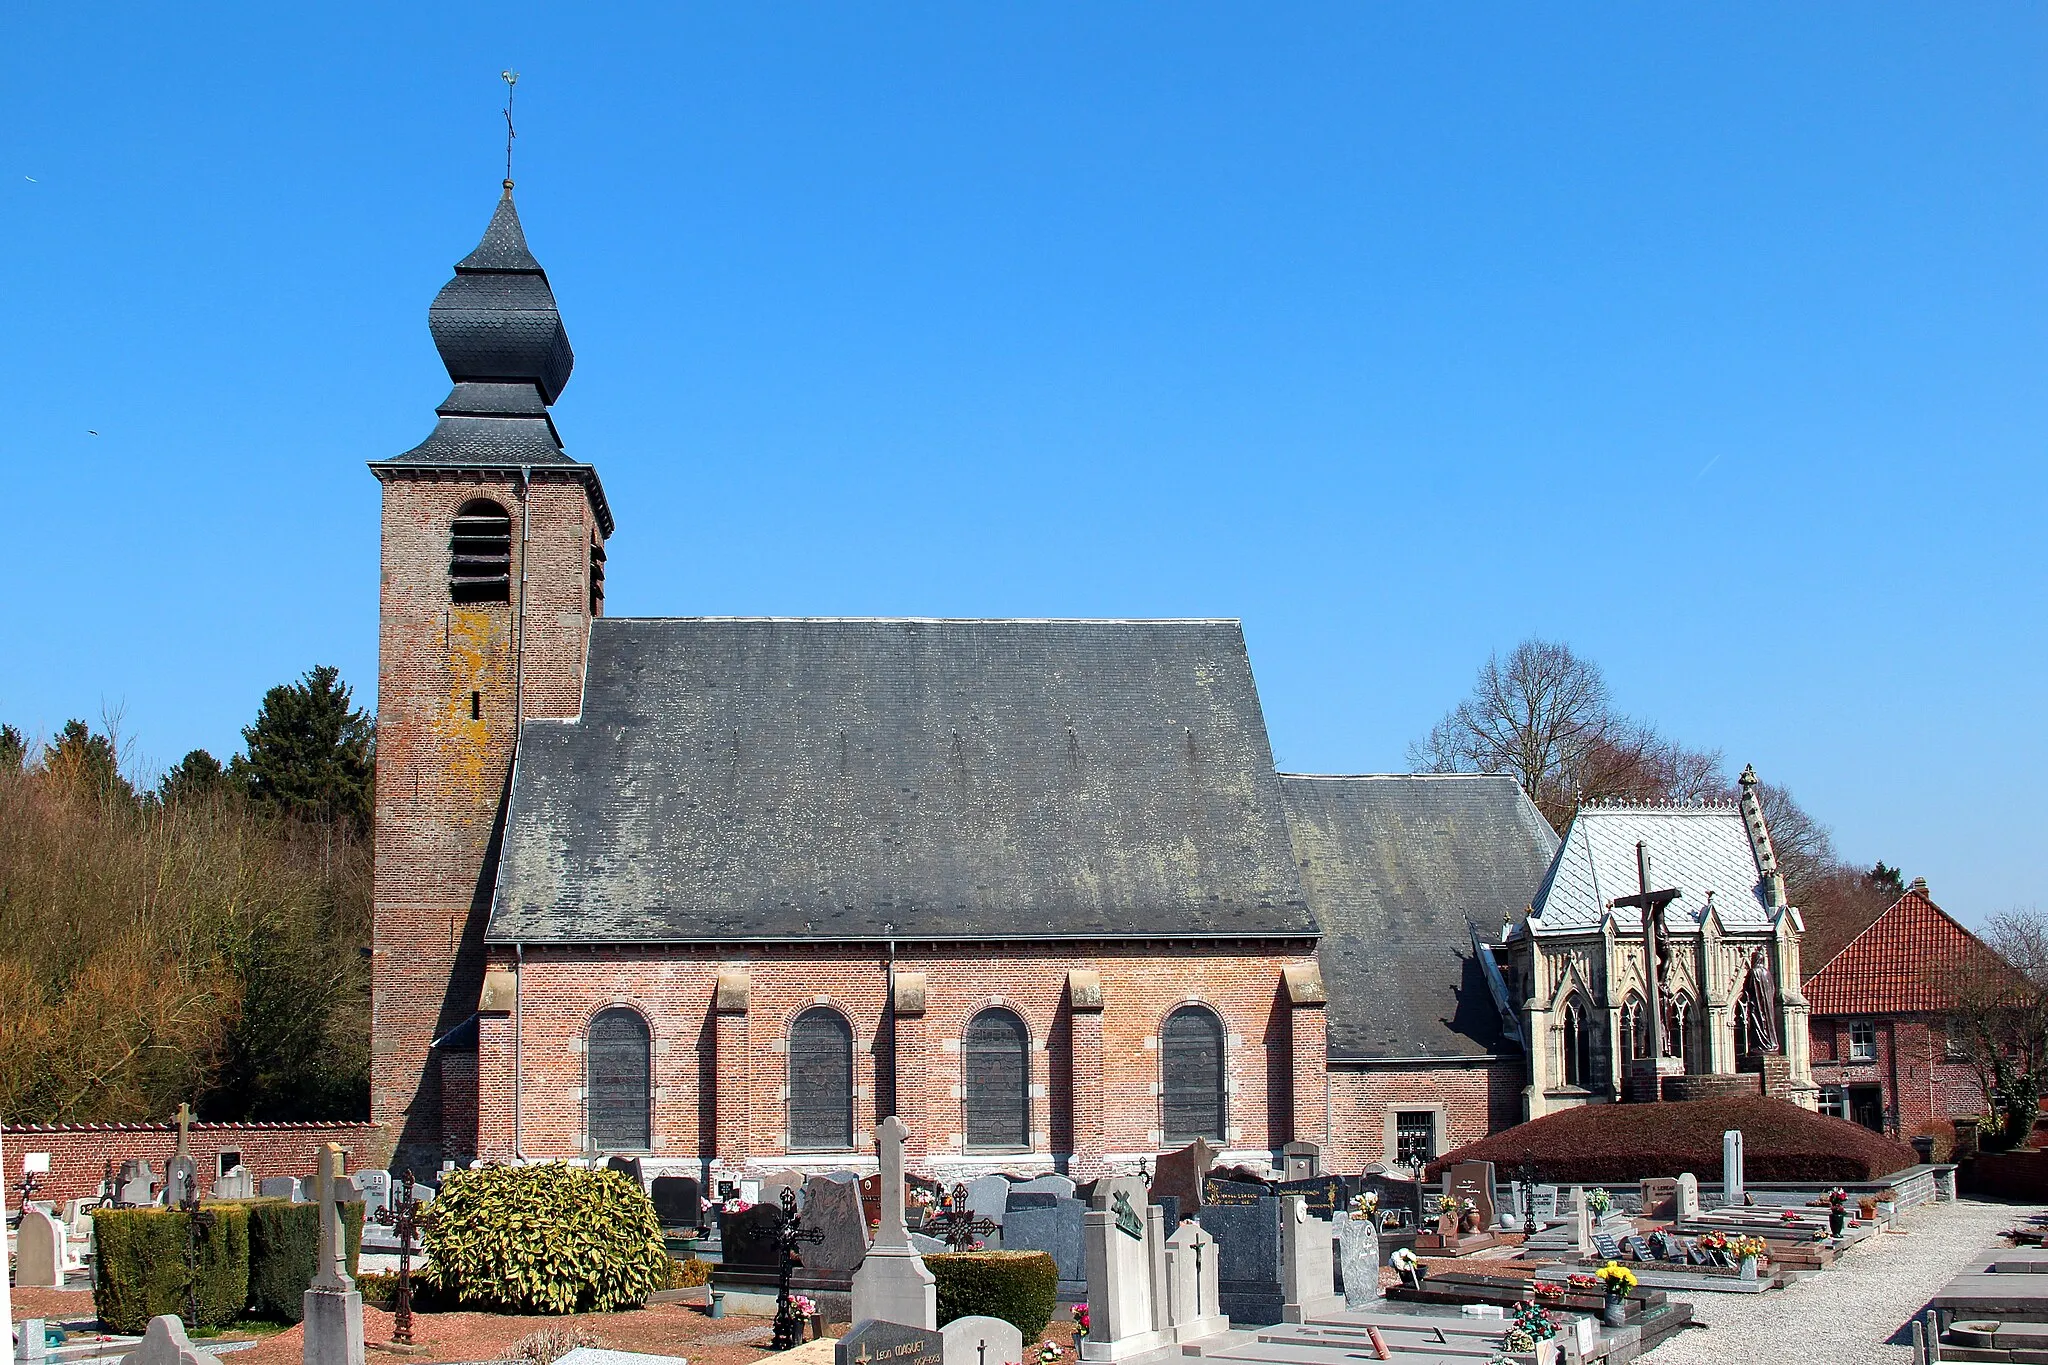 Photo showing: Moulbaix (Belgium), the St. Sulpice church (1750) and seigniorial neo-Gothic chapel of the de Chasteleer family.
(XVII/XVIIIth centuries).